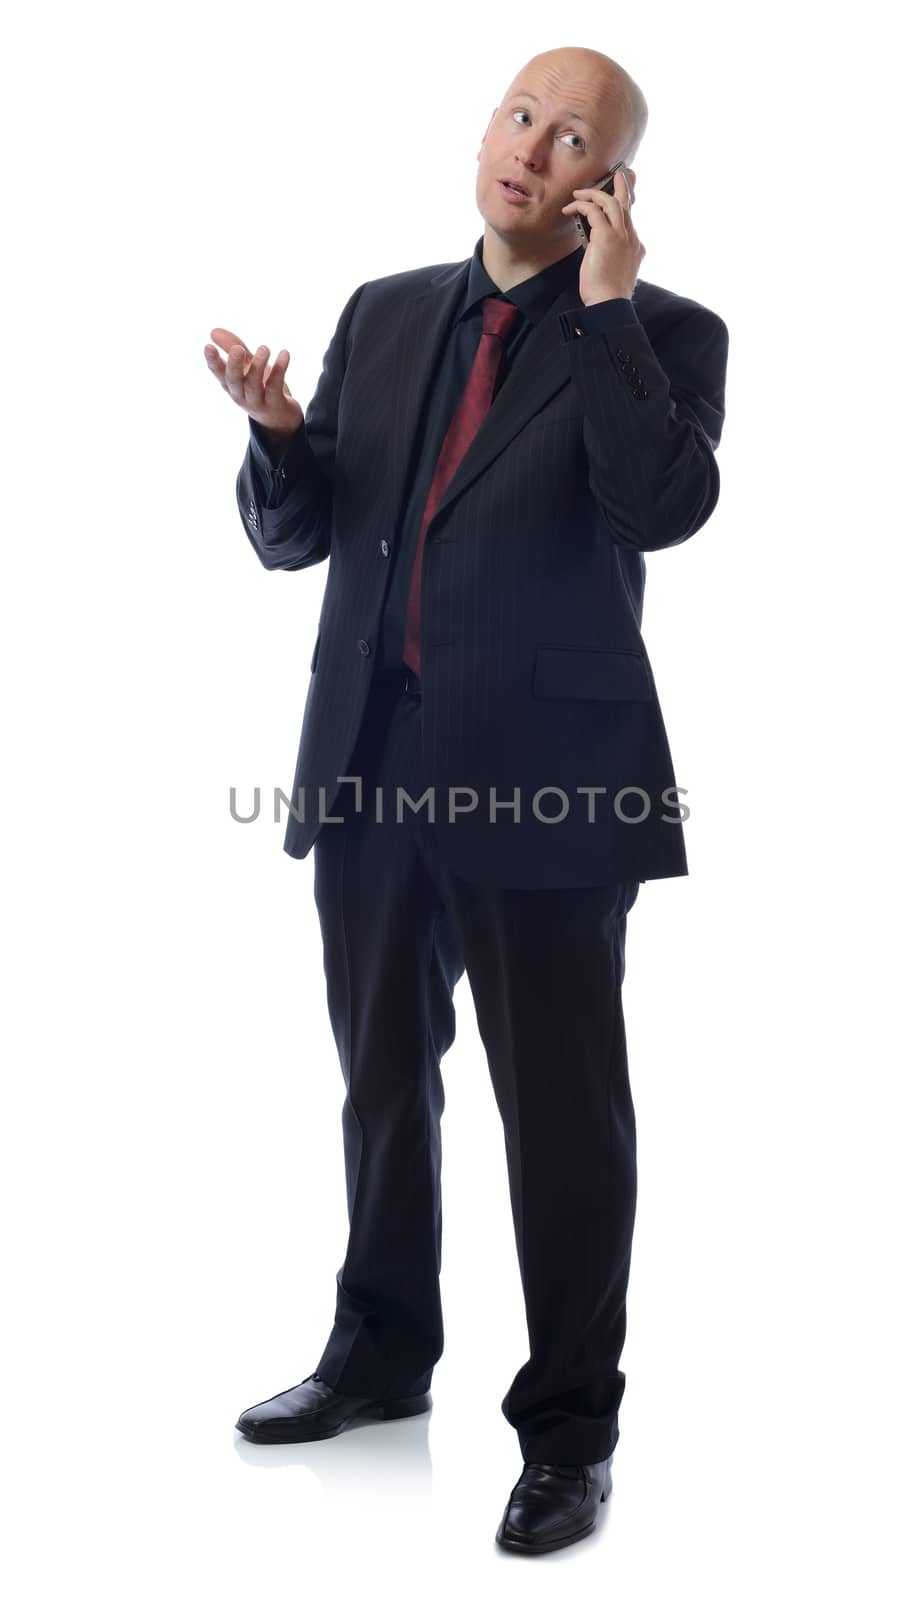 Buisness man on mobile phone isolated on white